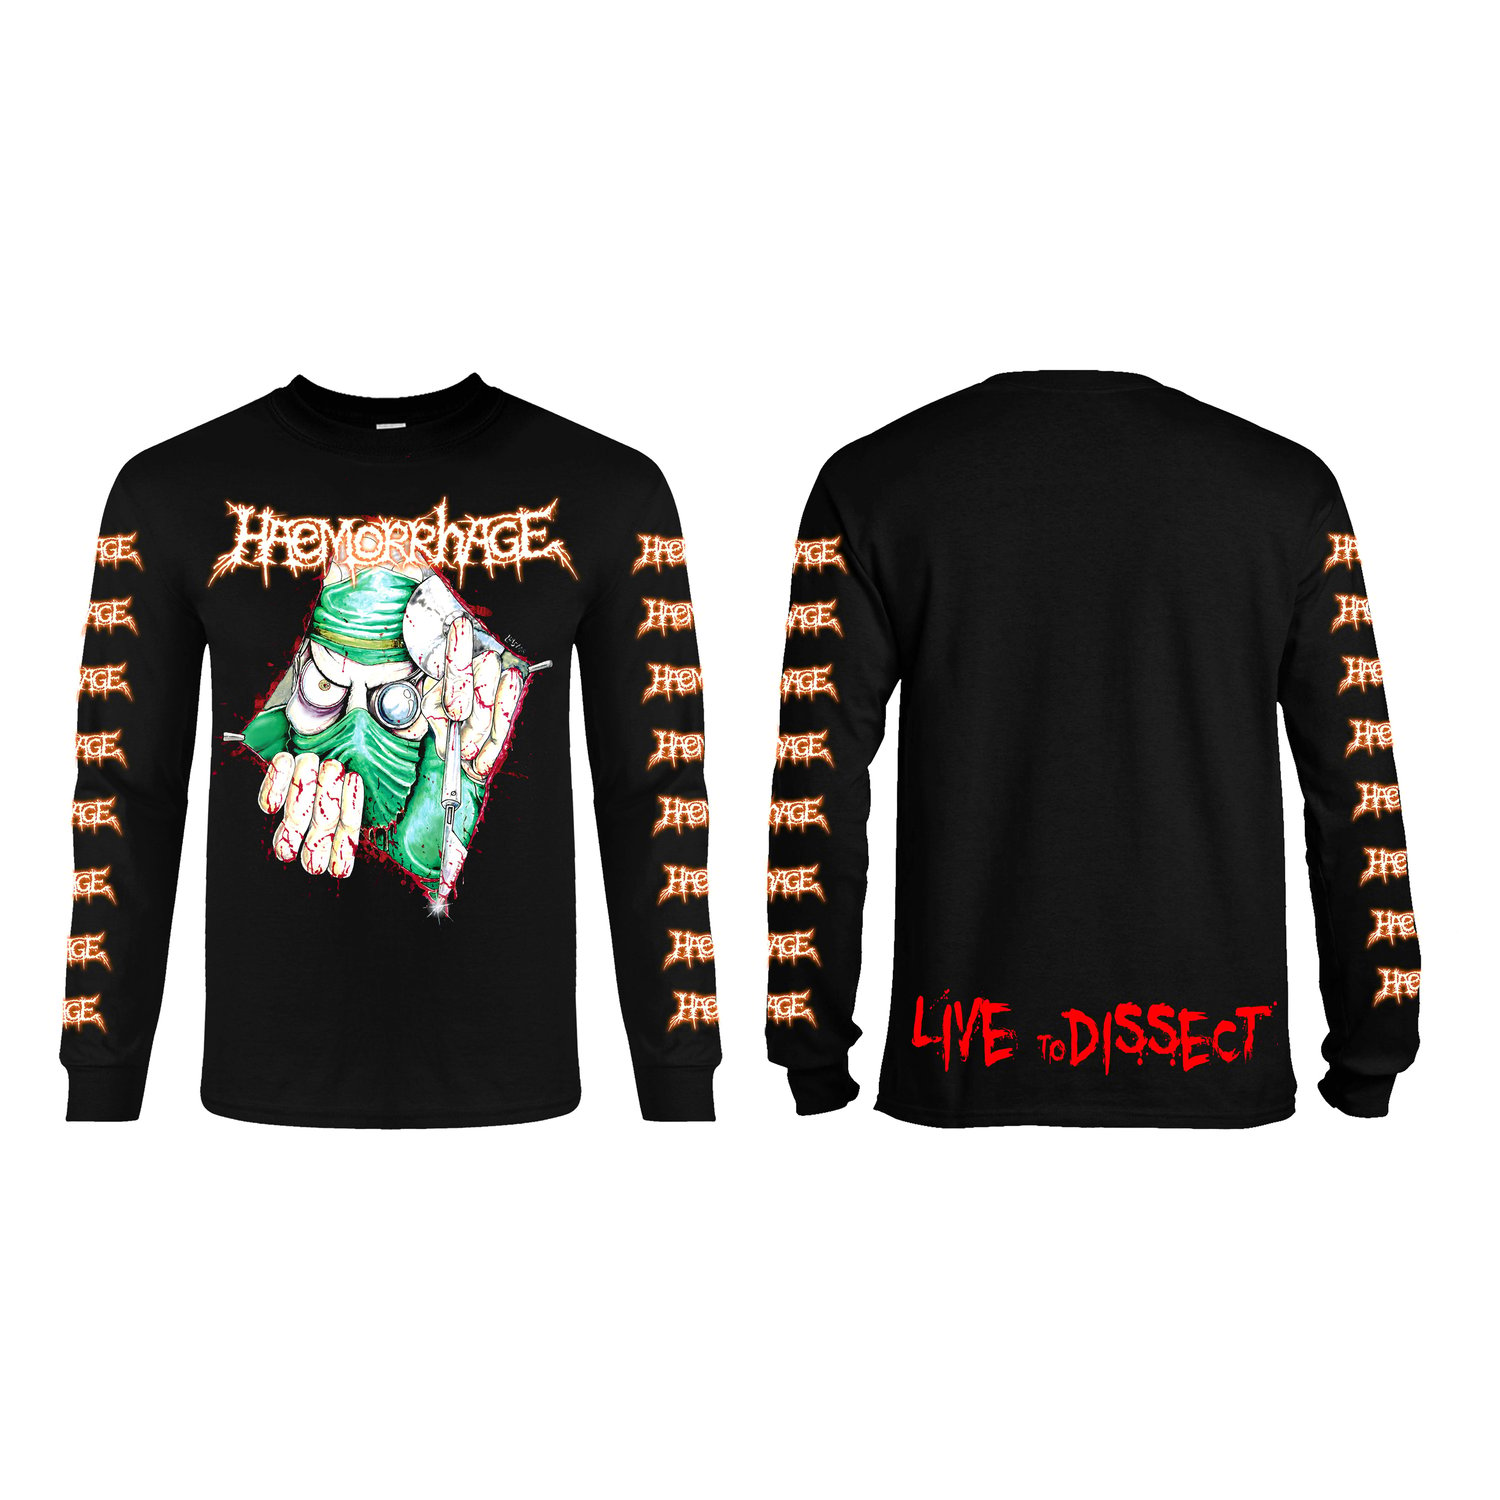 Image of HAEMORRHAGE - Merch Single Item (SS/LS) & Bundle Package (SS/LS + Tape)